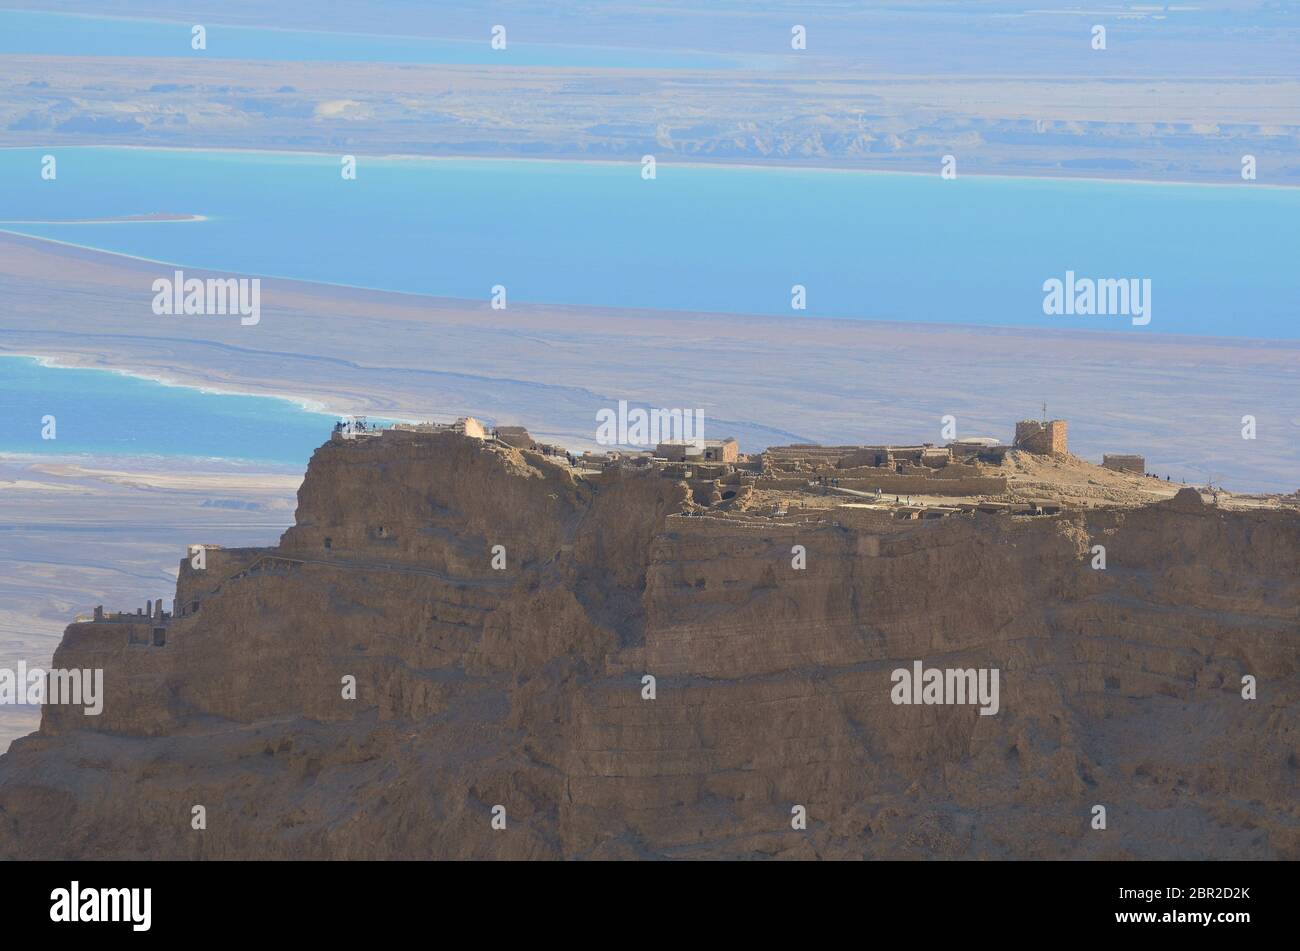 Aerial view of Masada fortress area with the Dead Sea in the background. Israel Stock Photo